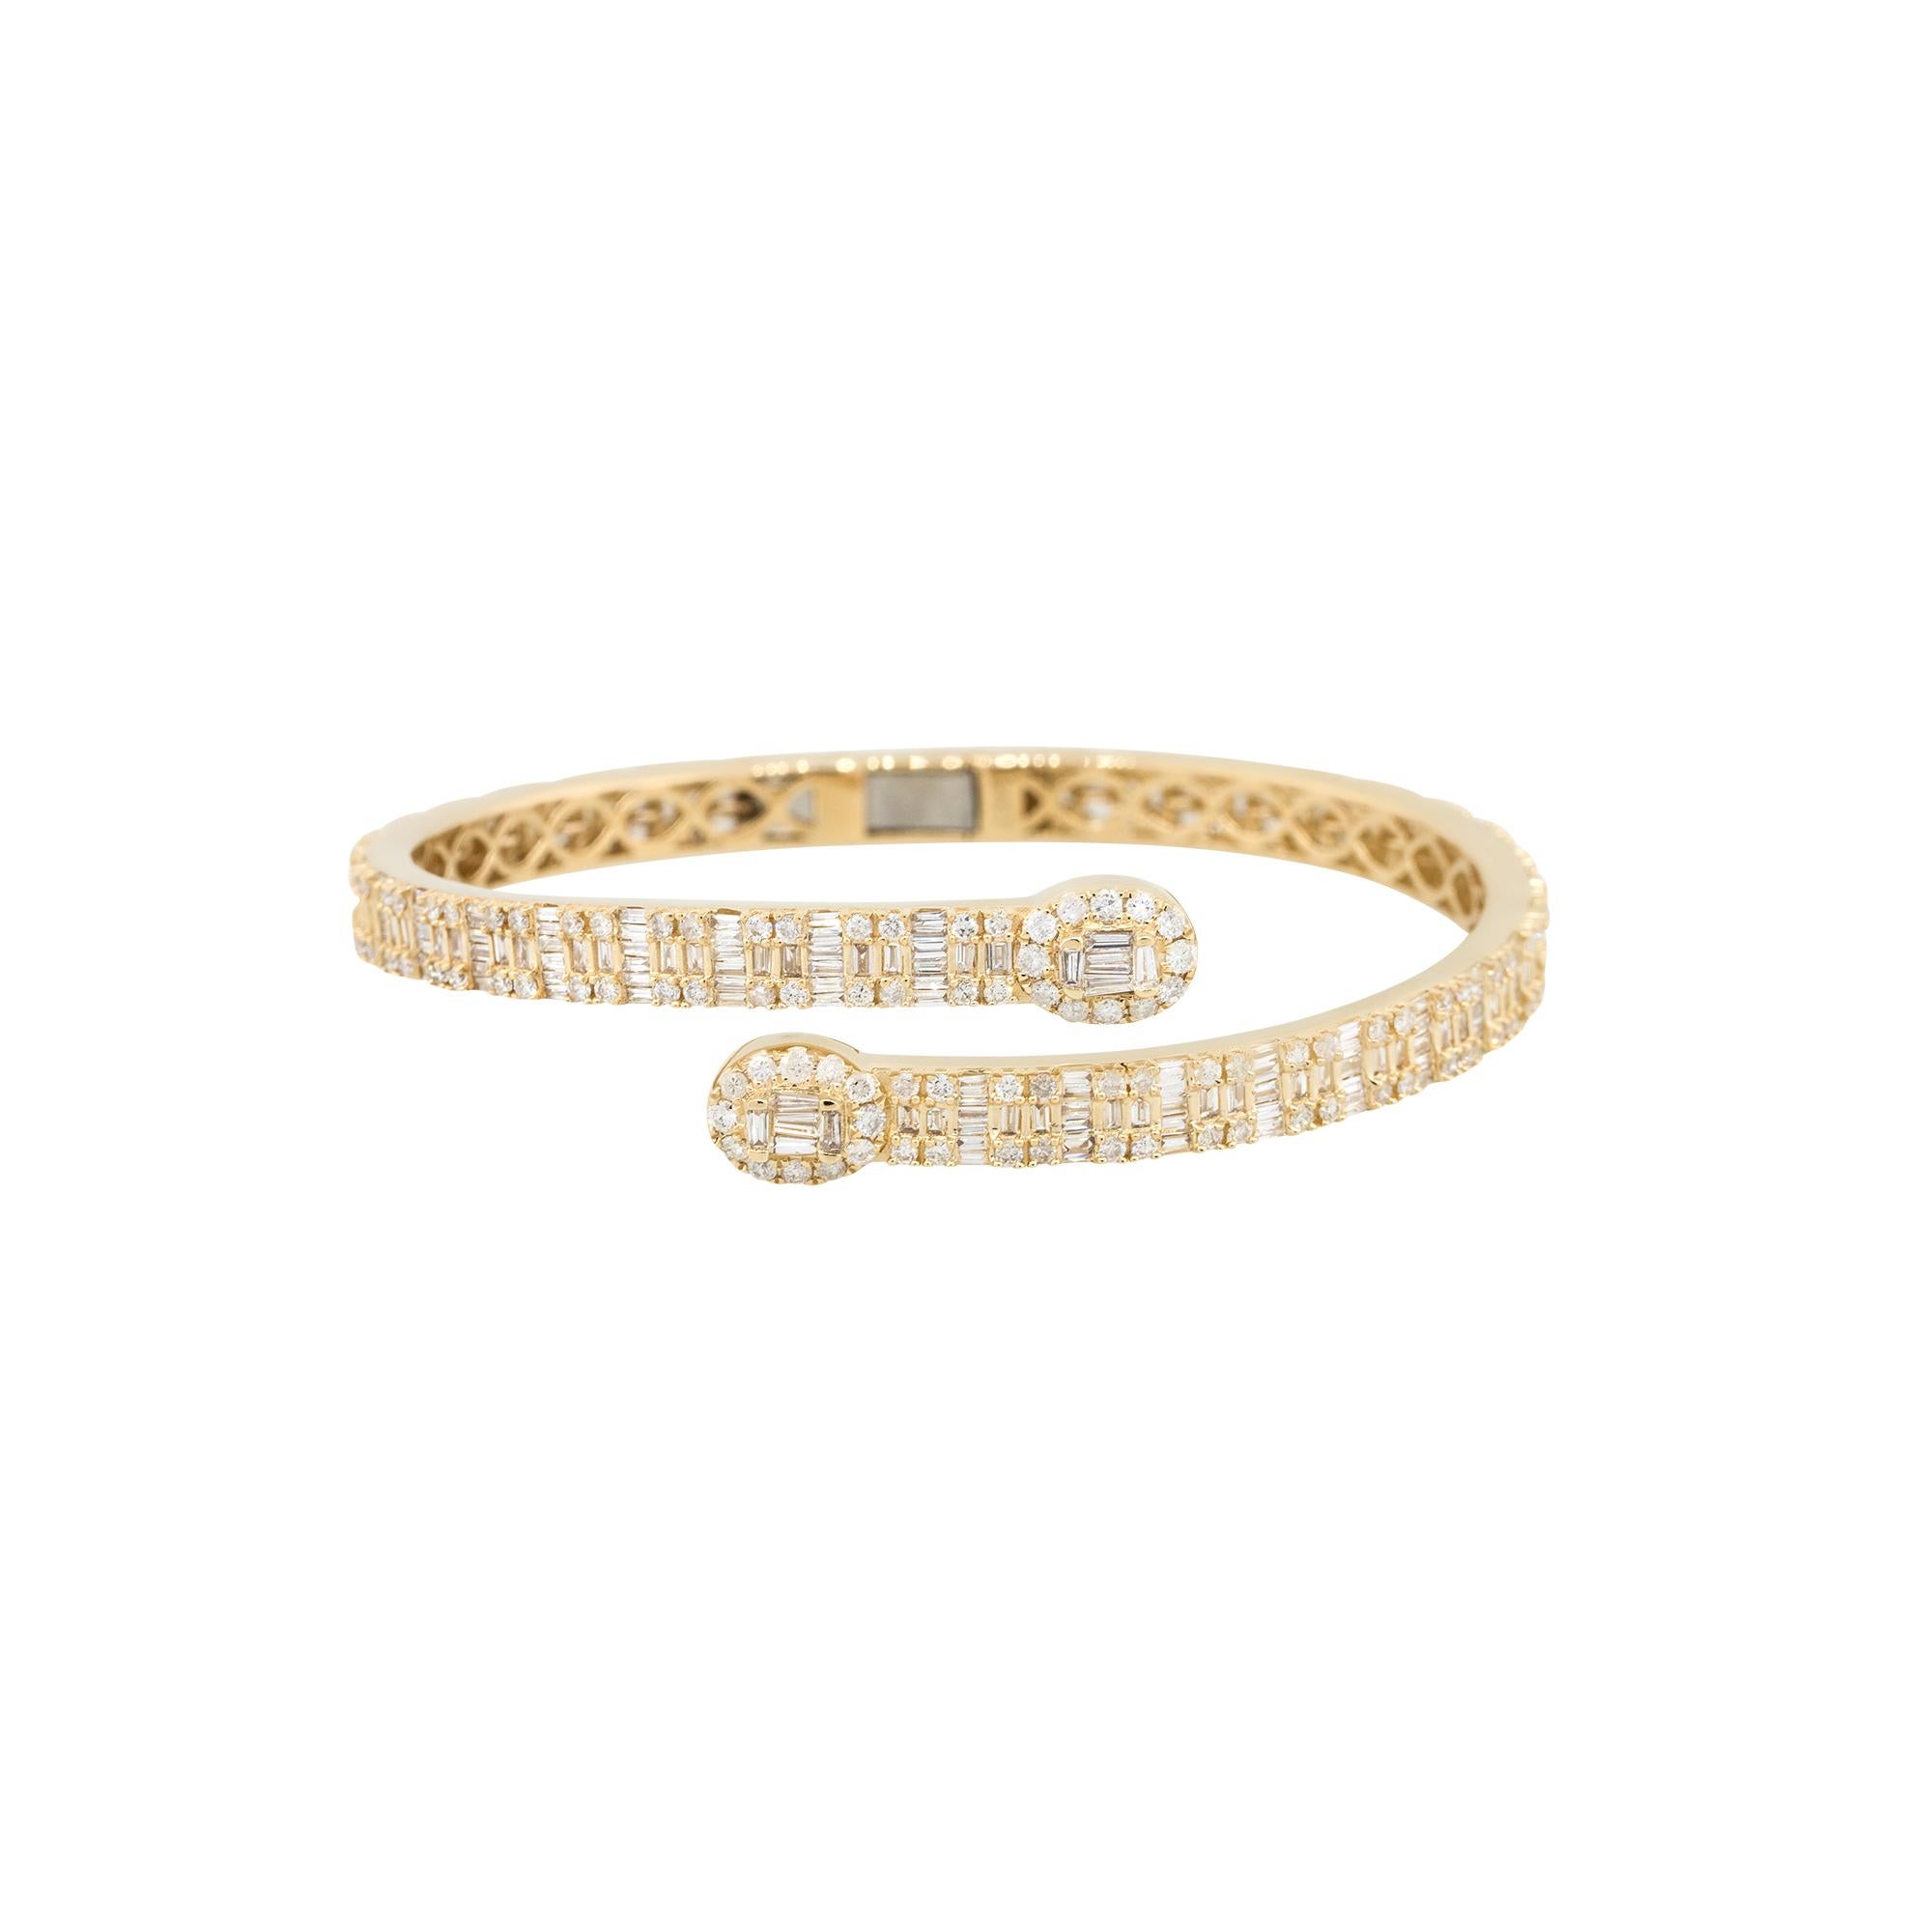 Material: 14k Yellow gold
Diamond Details: Approx. 8.75ctw of round and baguette cut Diamonds. Diamonds are G/H in color and VS in clarity
Measurements: 64mm x 14.5mm x 57mm
                           Will fit up to a 7